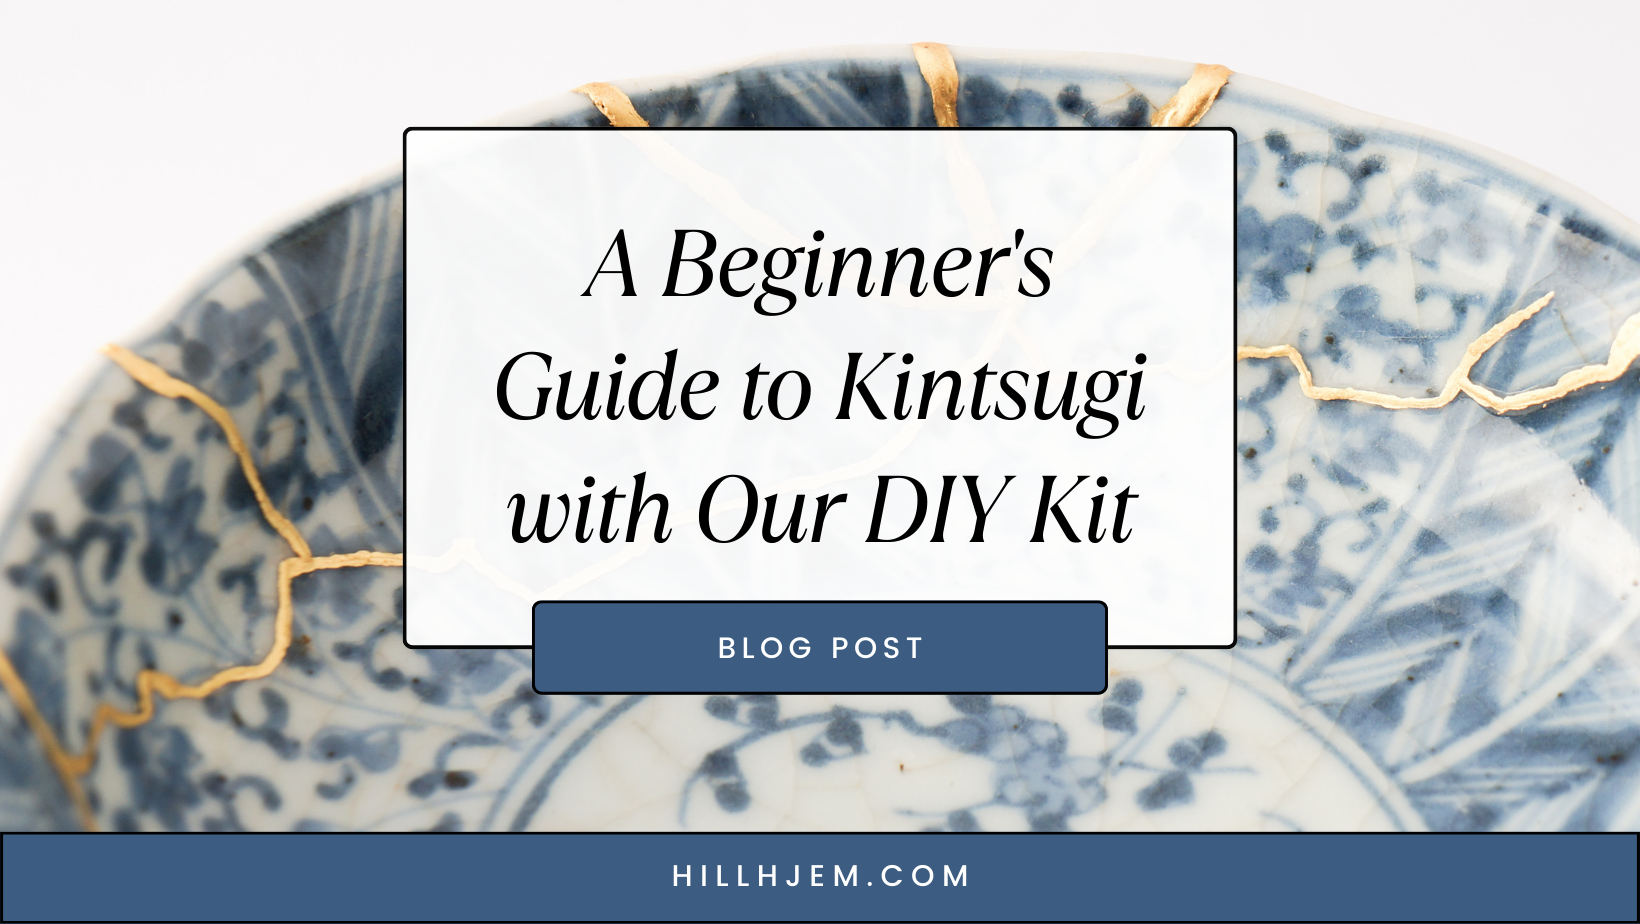 A Beginner's Guide to Kintsugi with Our DIY Kit